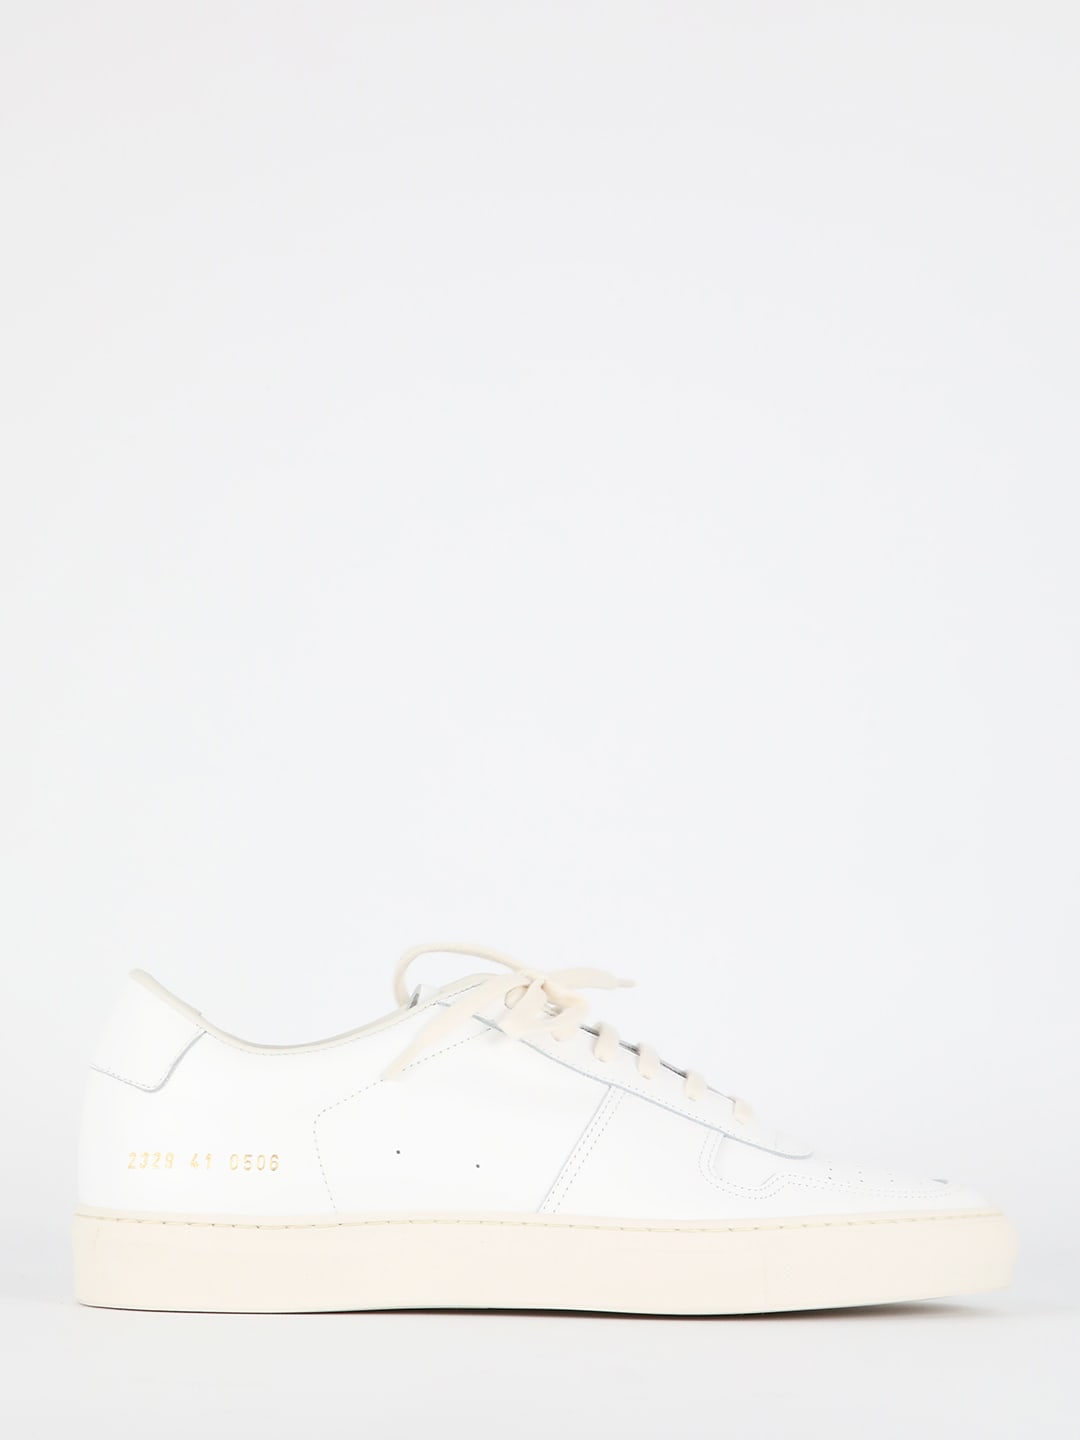 Common Projects Bball White Sneakers